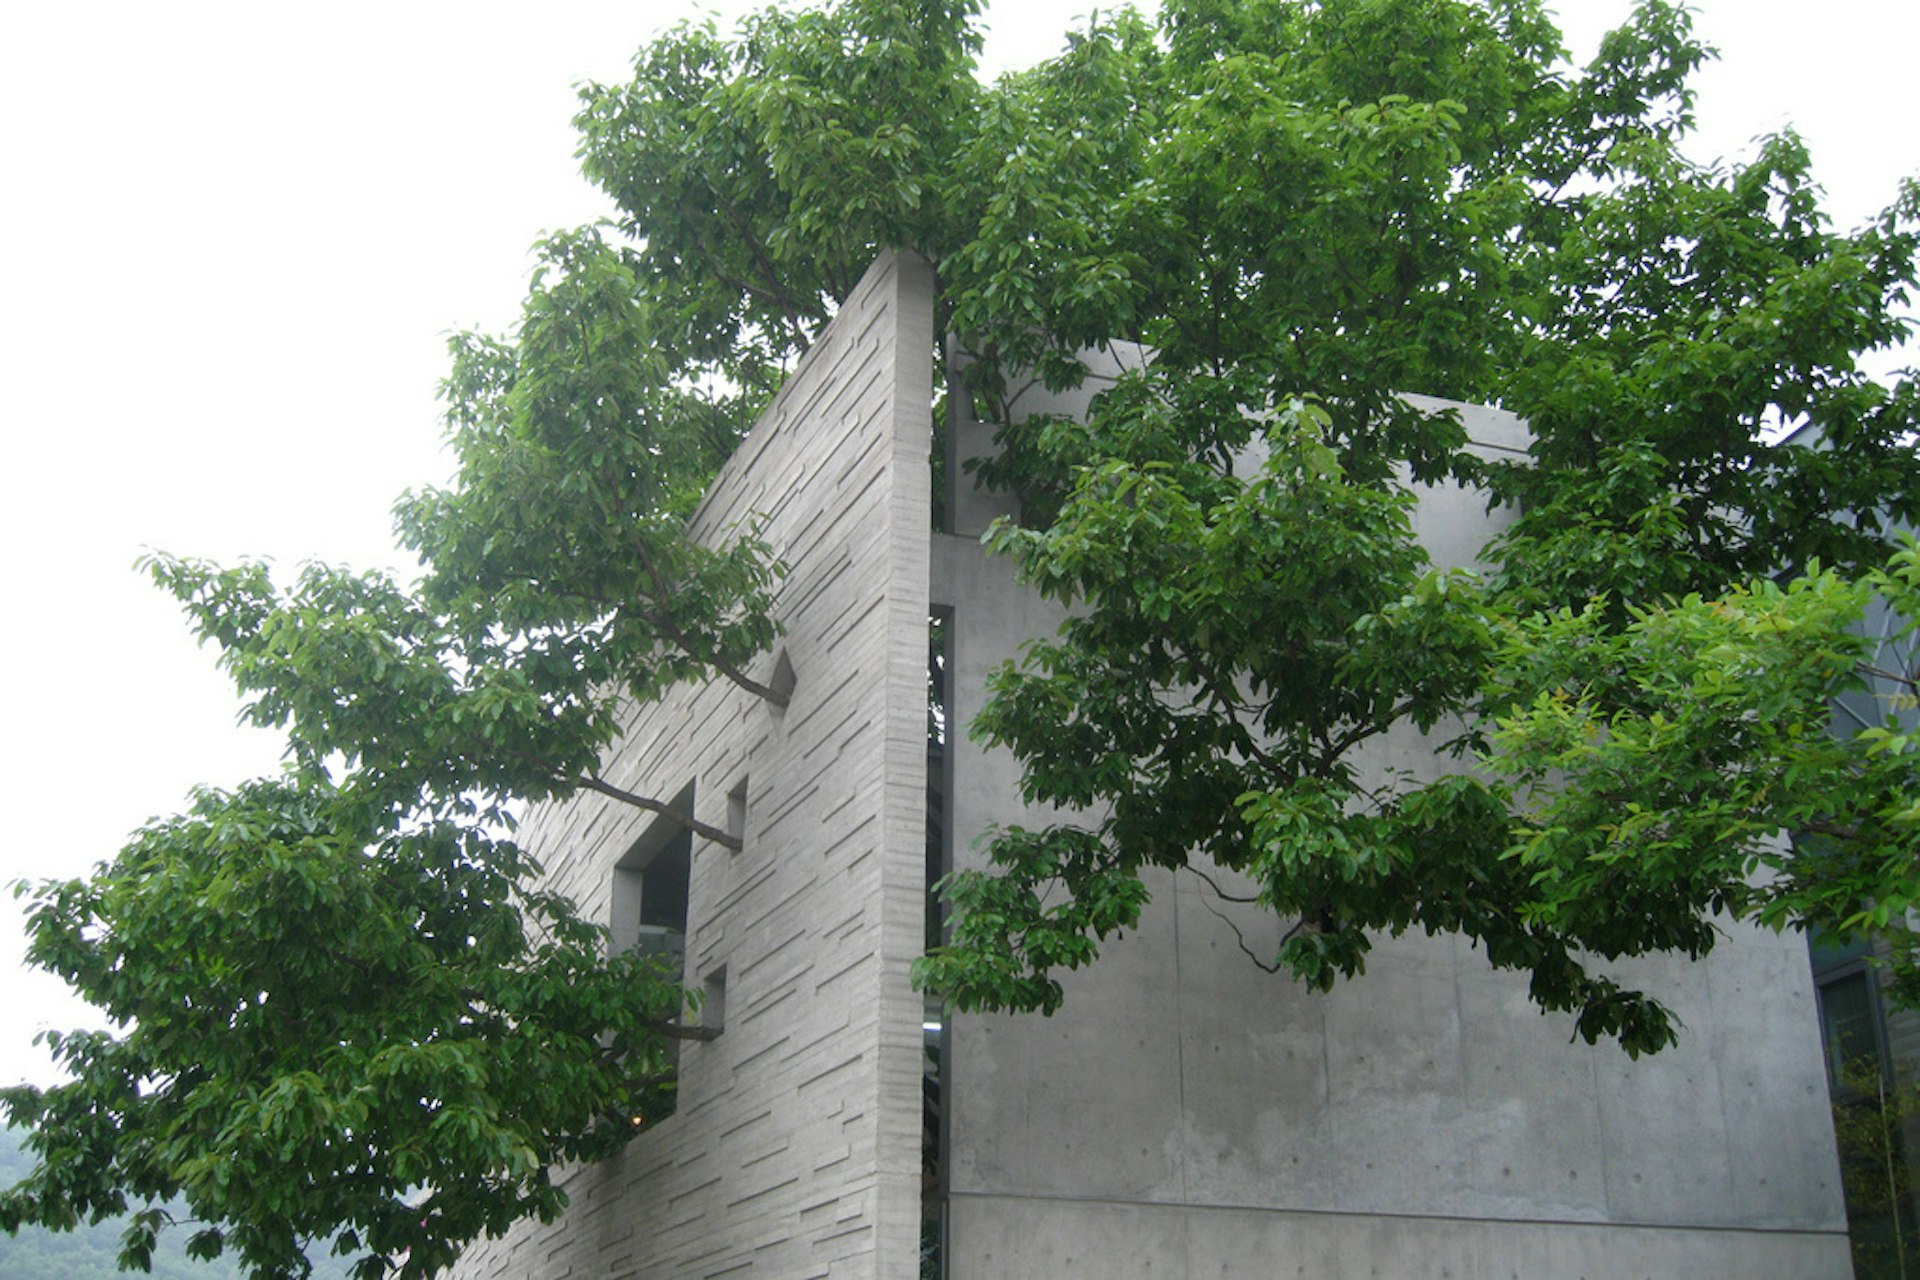 Trees growing out of the Keumsan Gallery. Image by Julie Facine / CC BY-SA 2.0